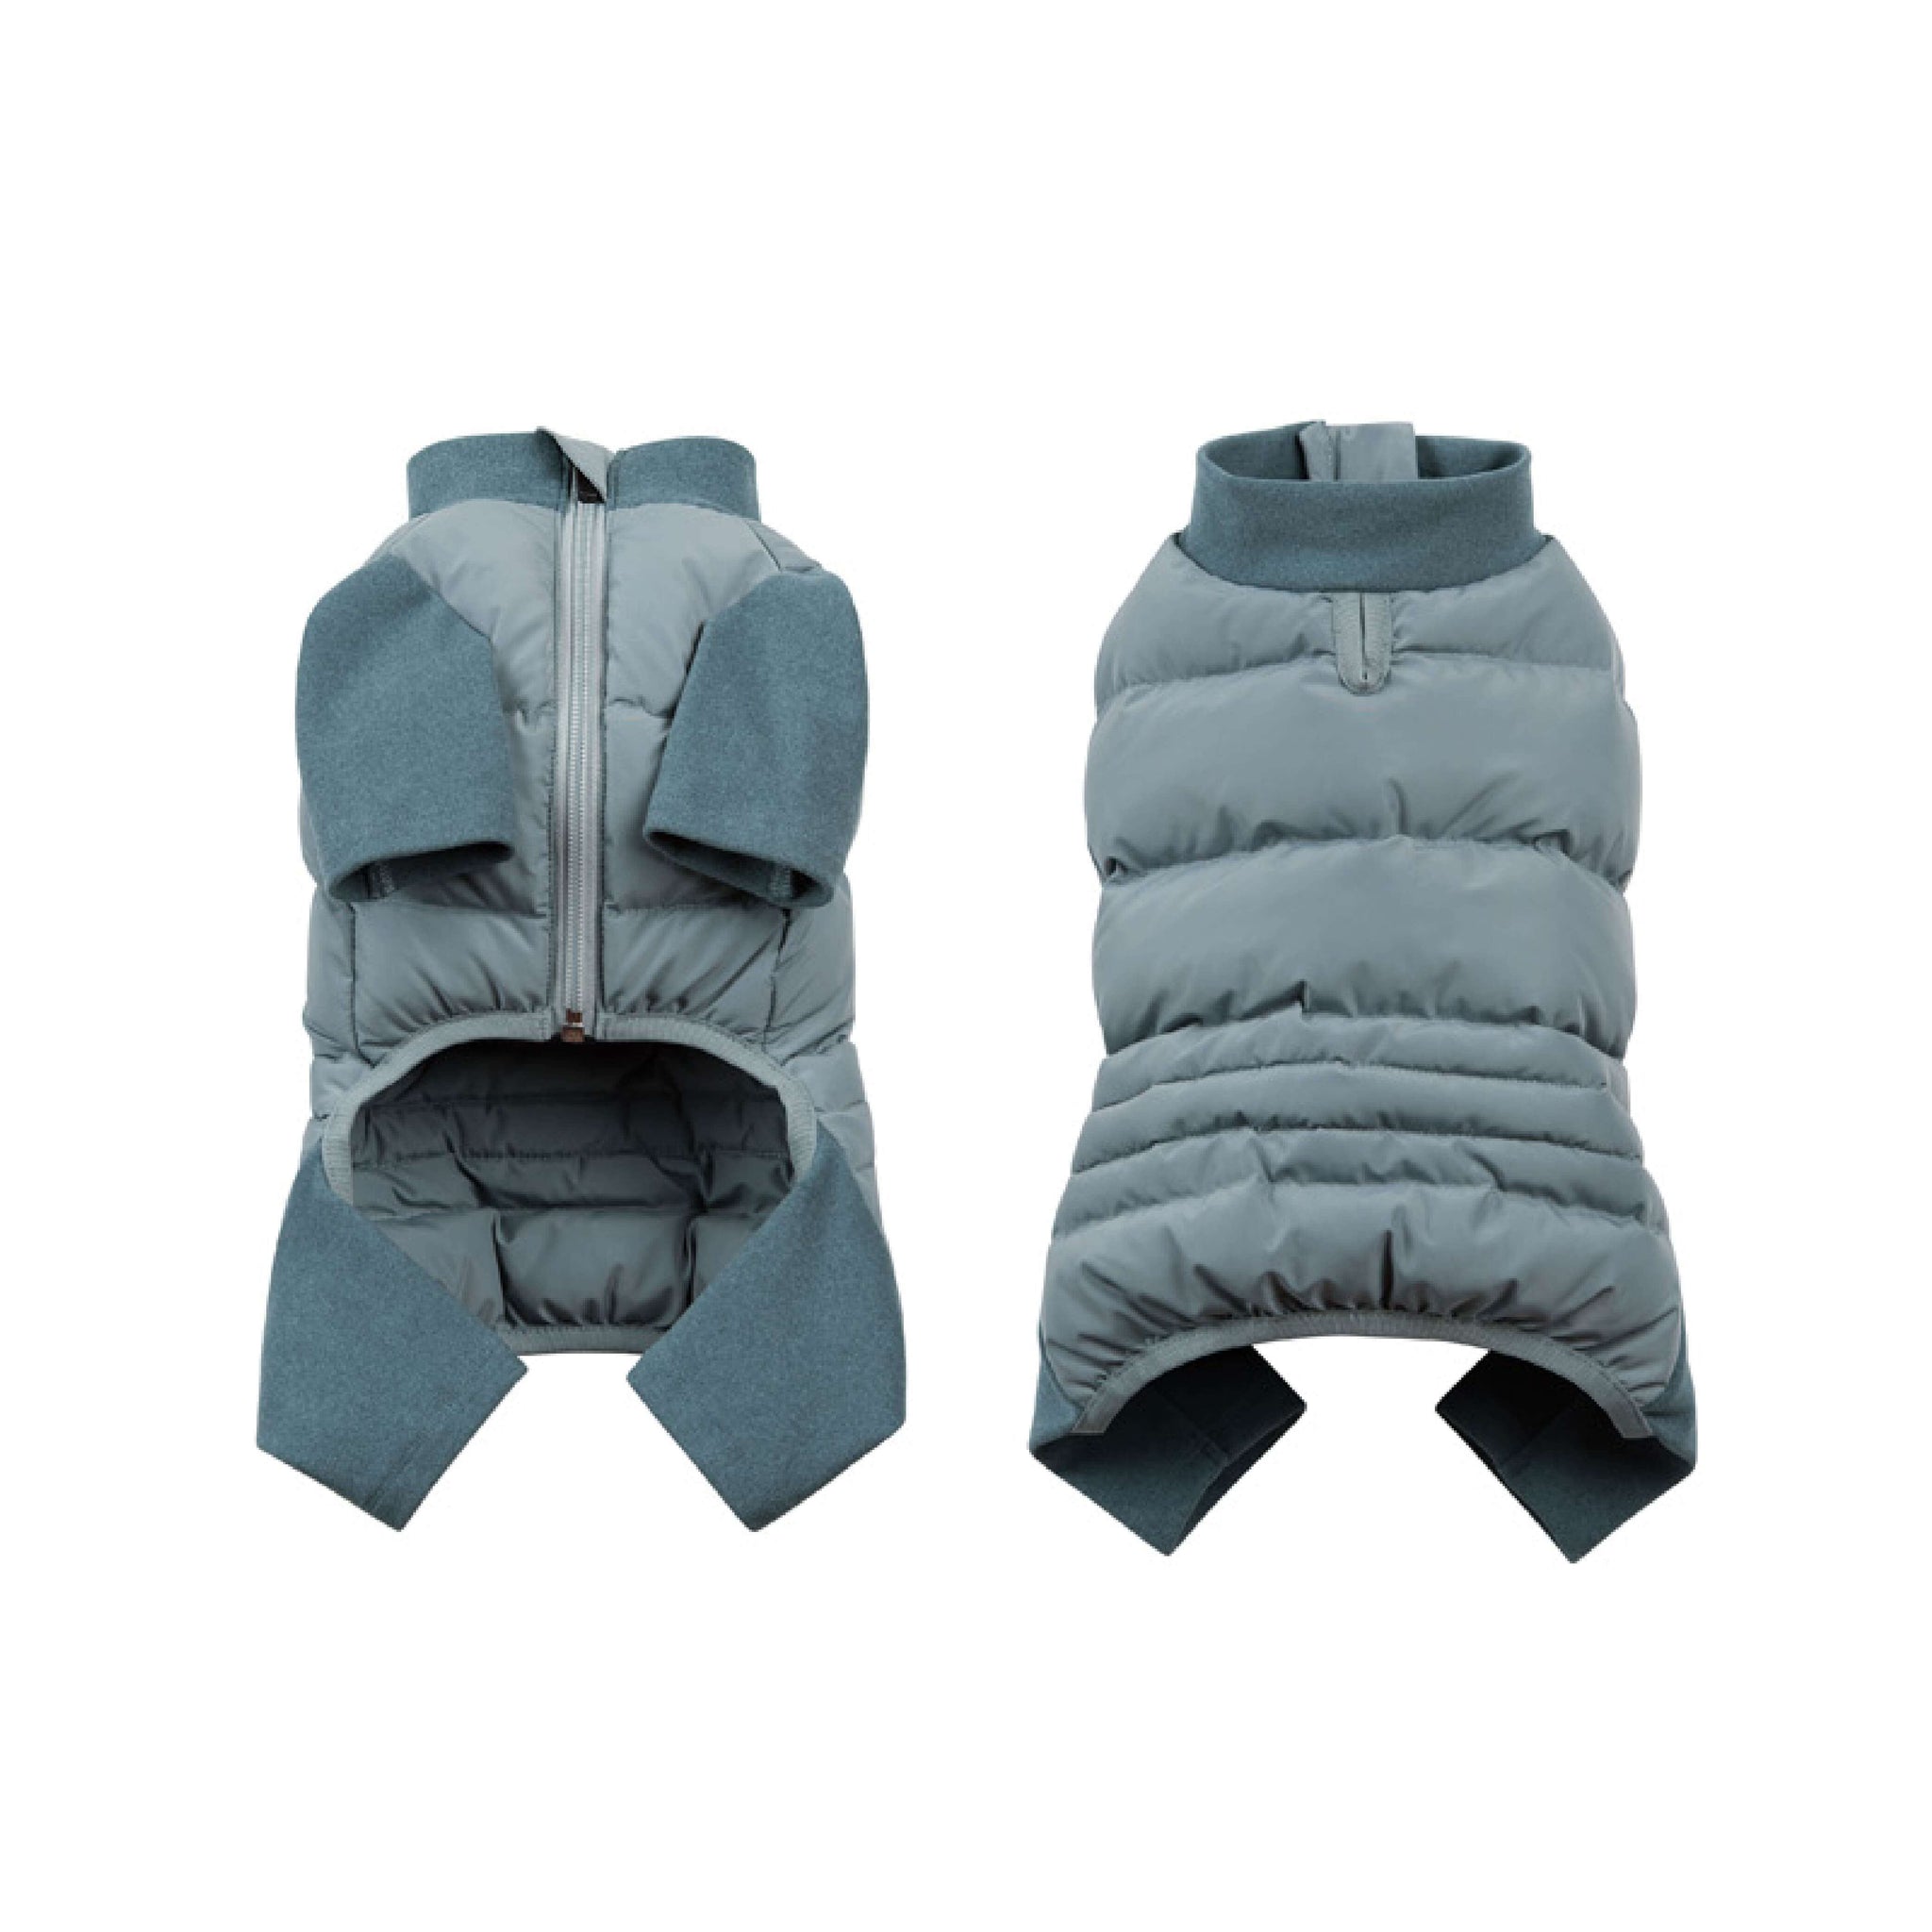 Comfort legs eco down jumpsuit in gray blue.